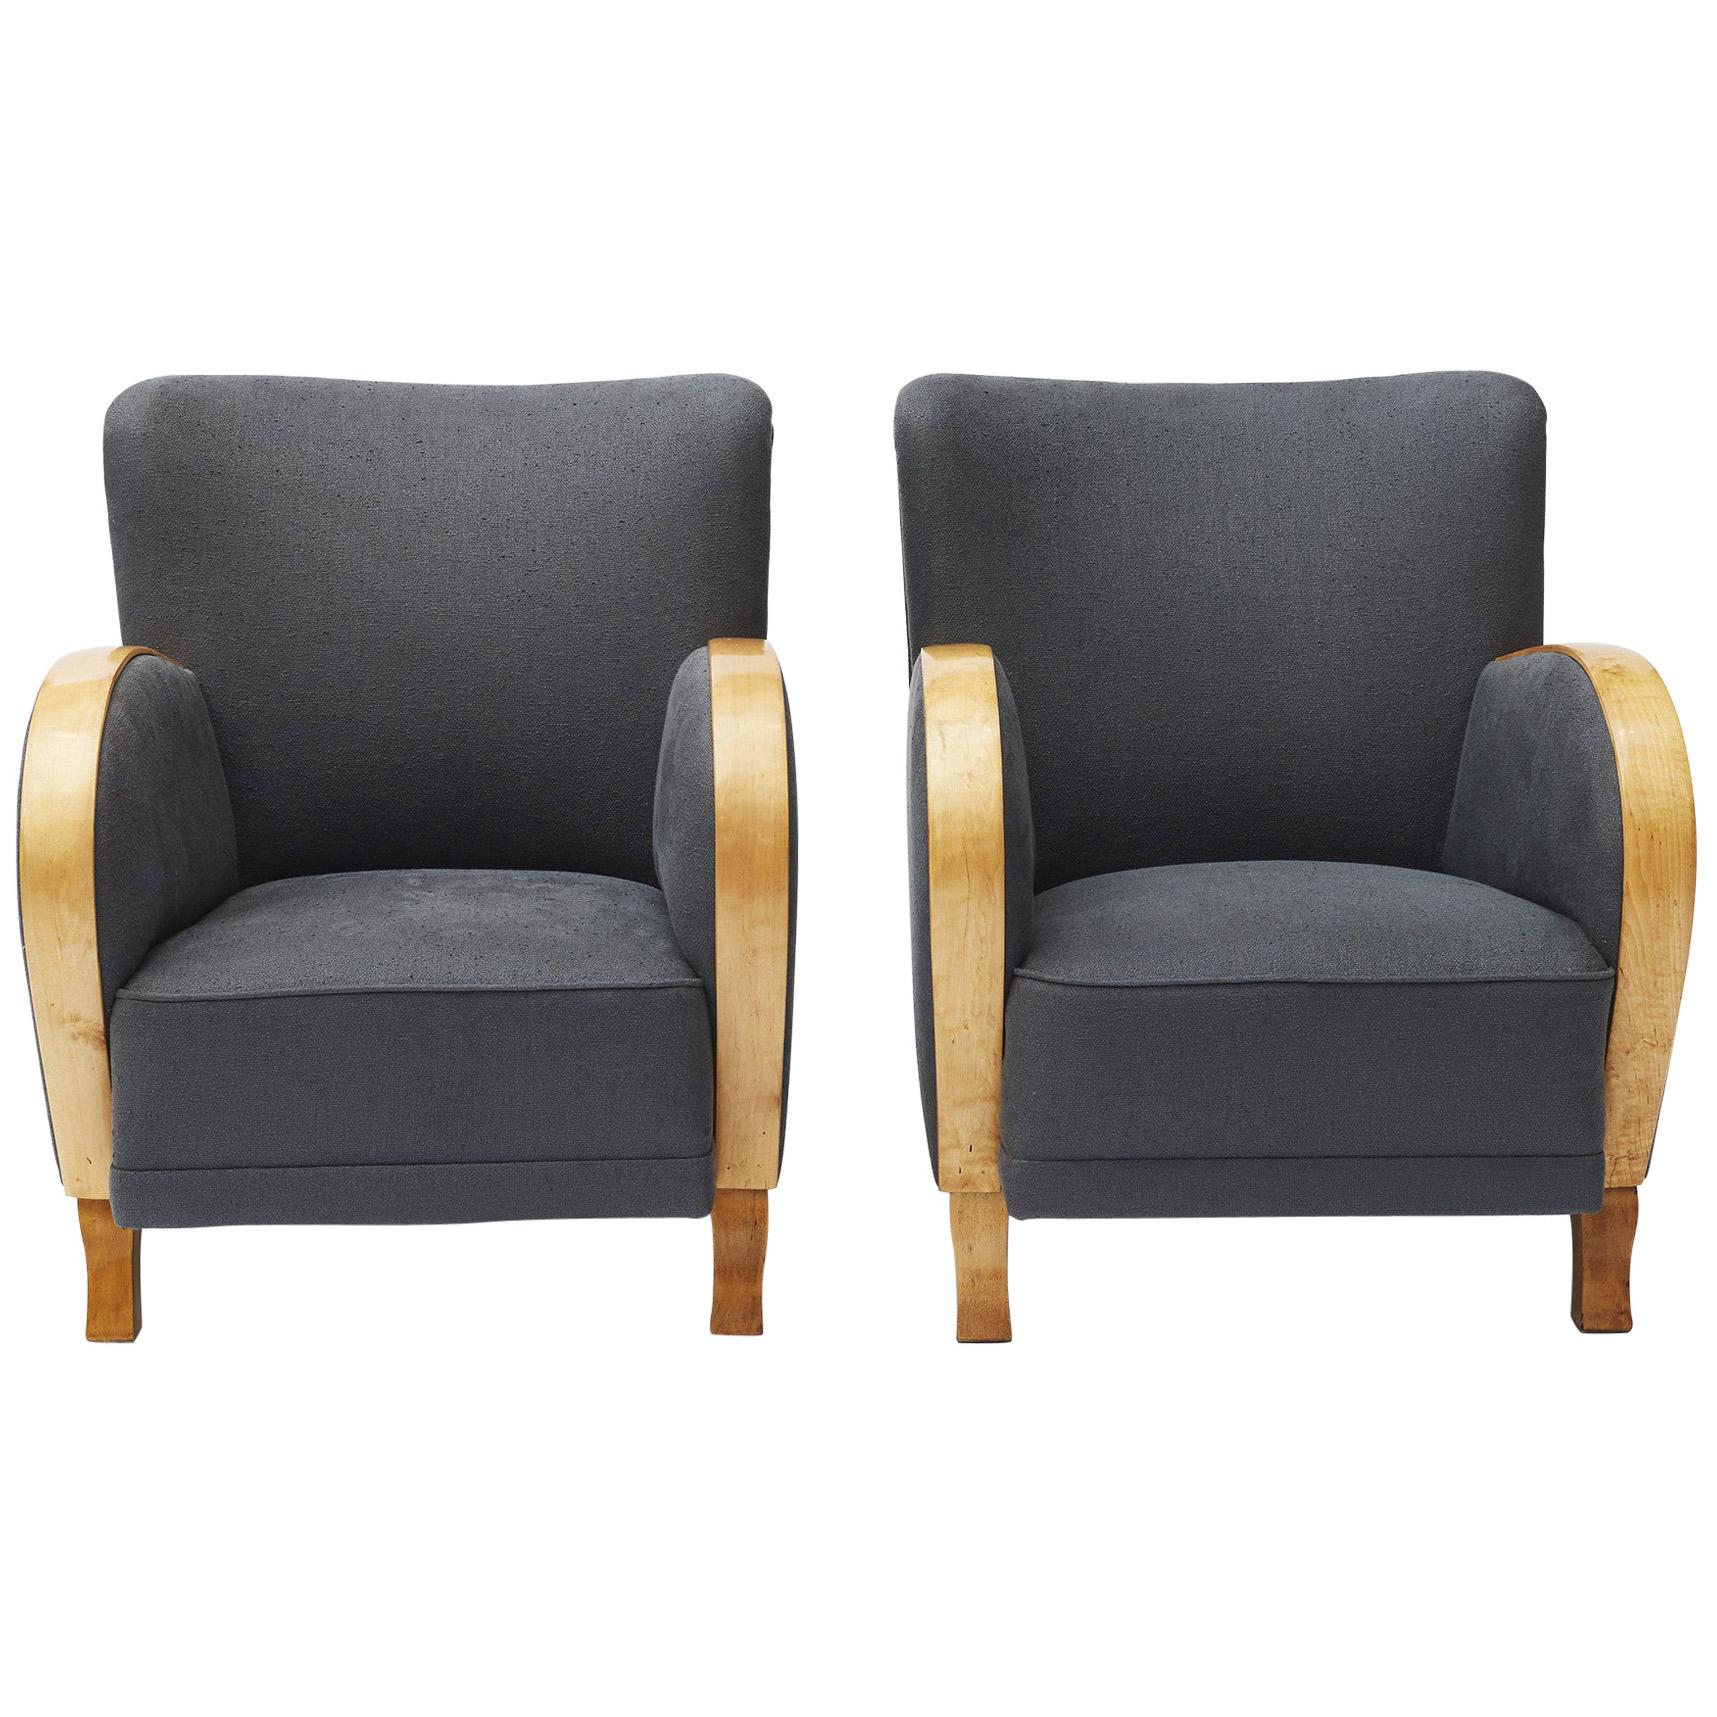 Pair of Swedish Art Deco Easy Chairs In Birch & fabric For Sale